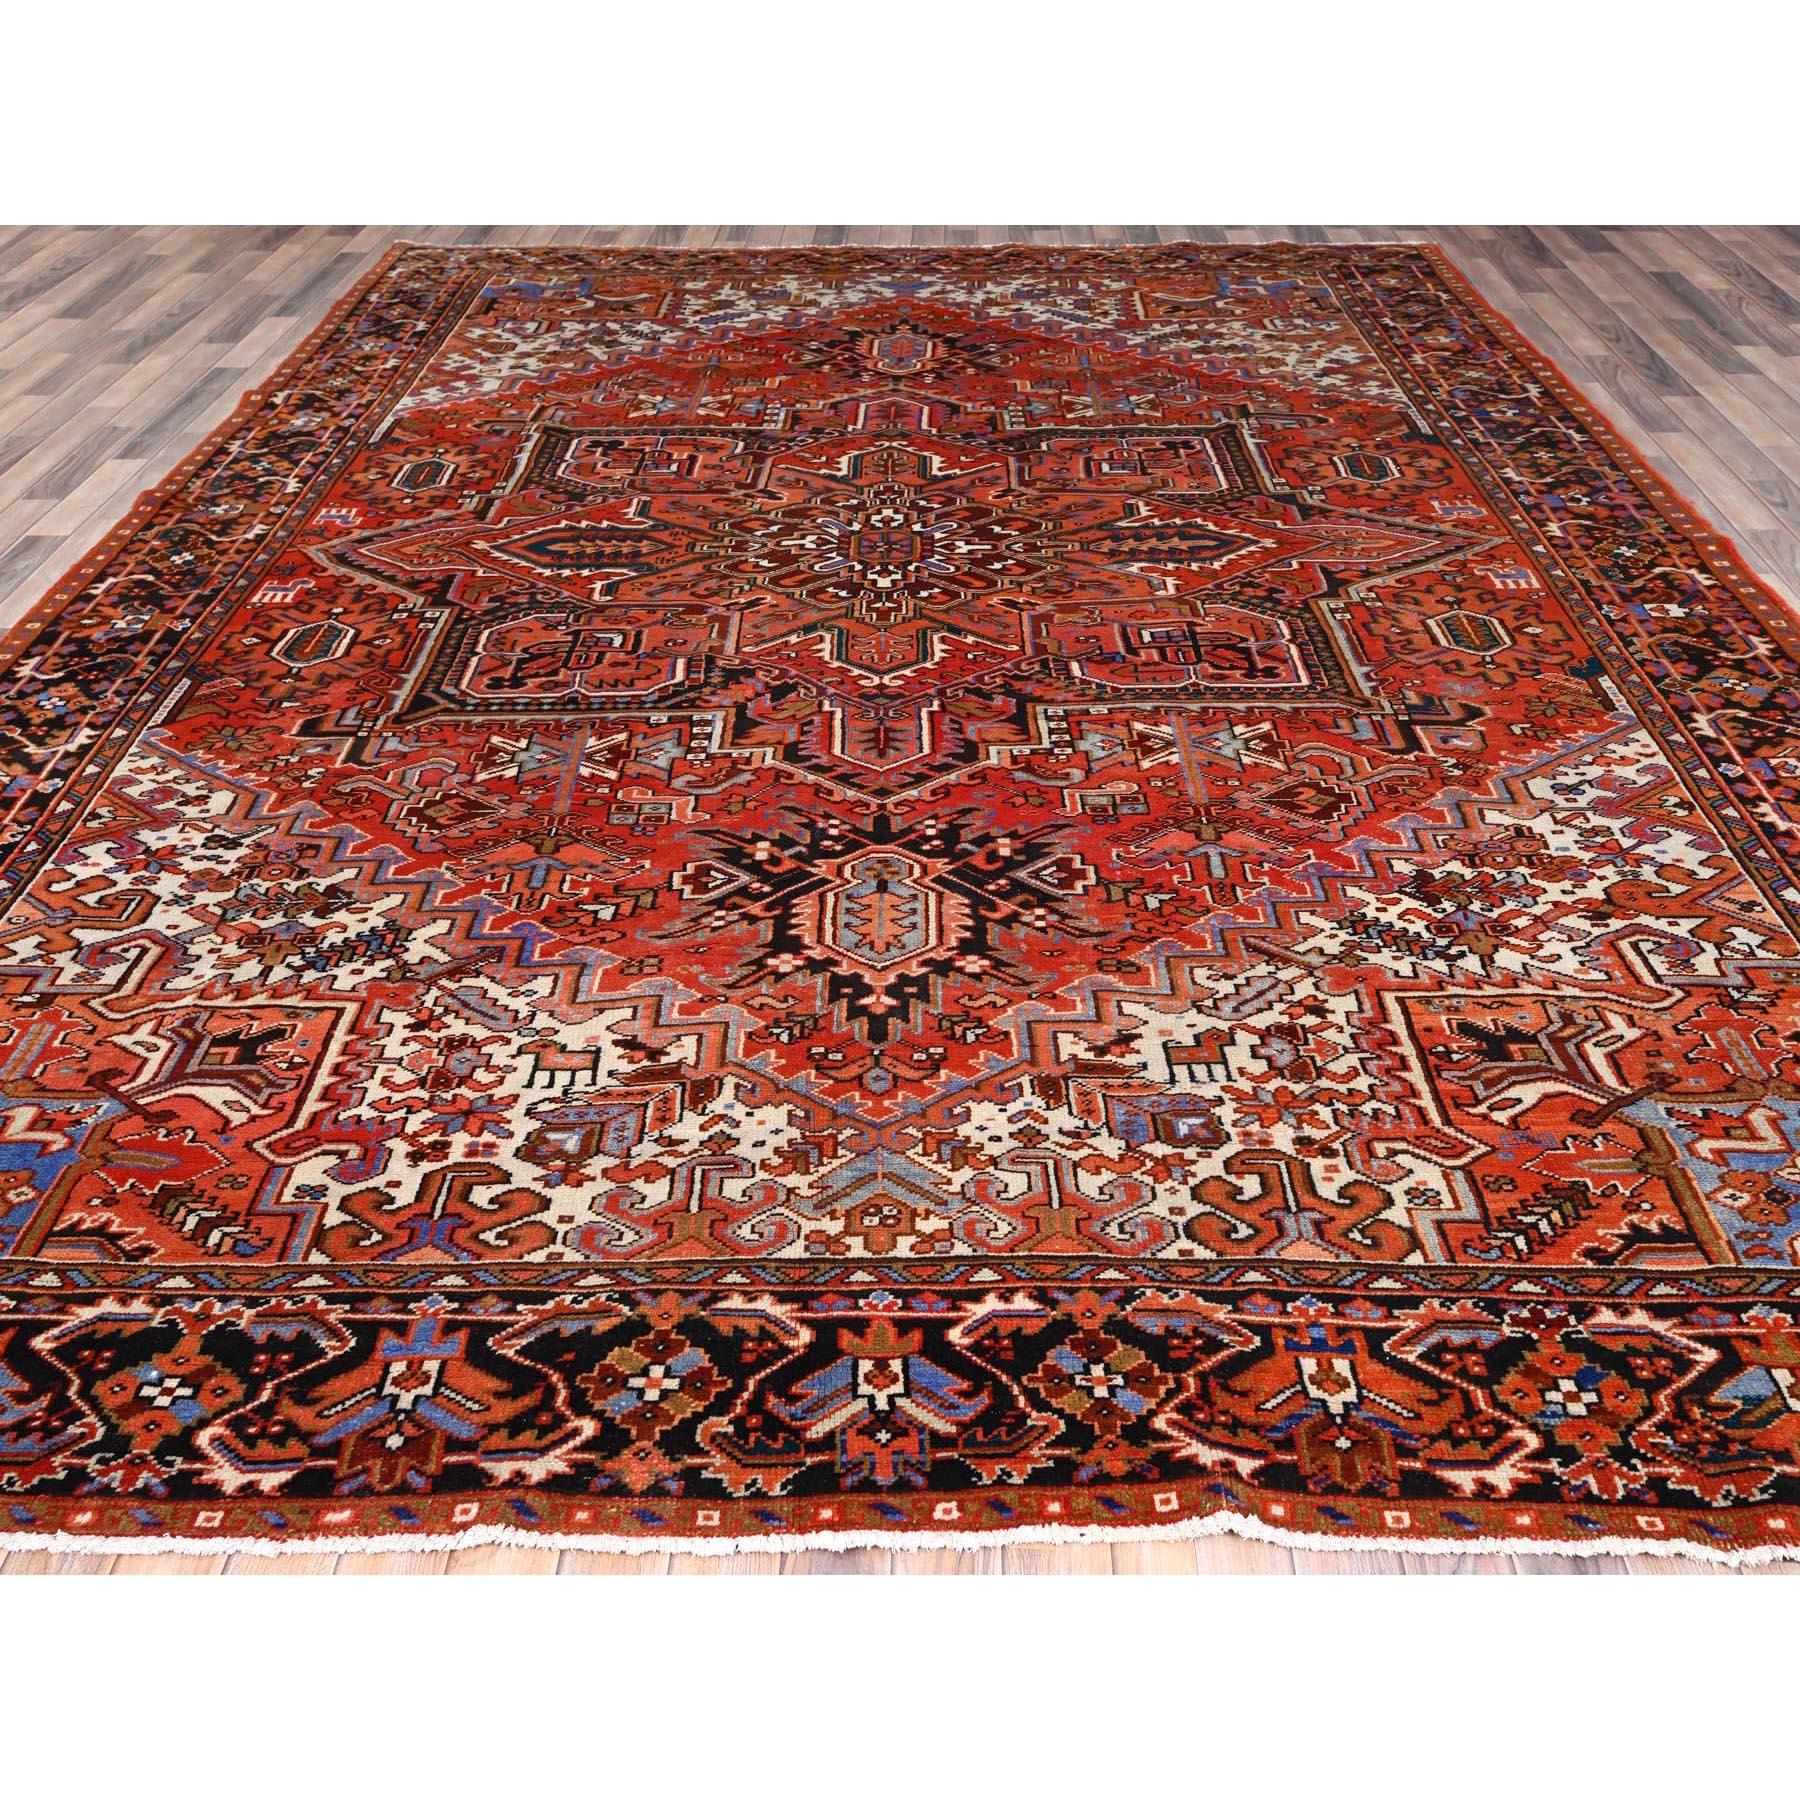 Hand-Knotted Red Vintage Persian Heriz Good Condition Rustic Feel Worn Wool Hand Knotted Rug